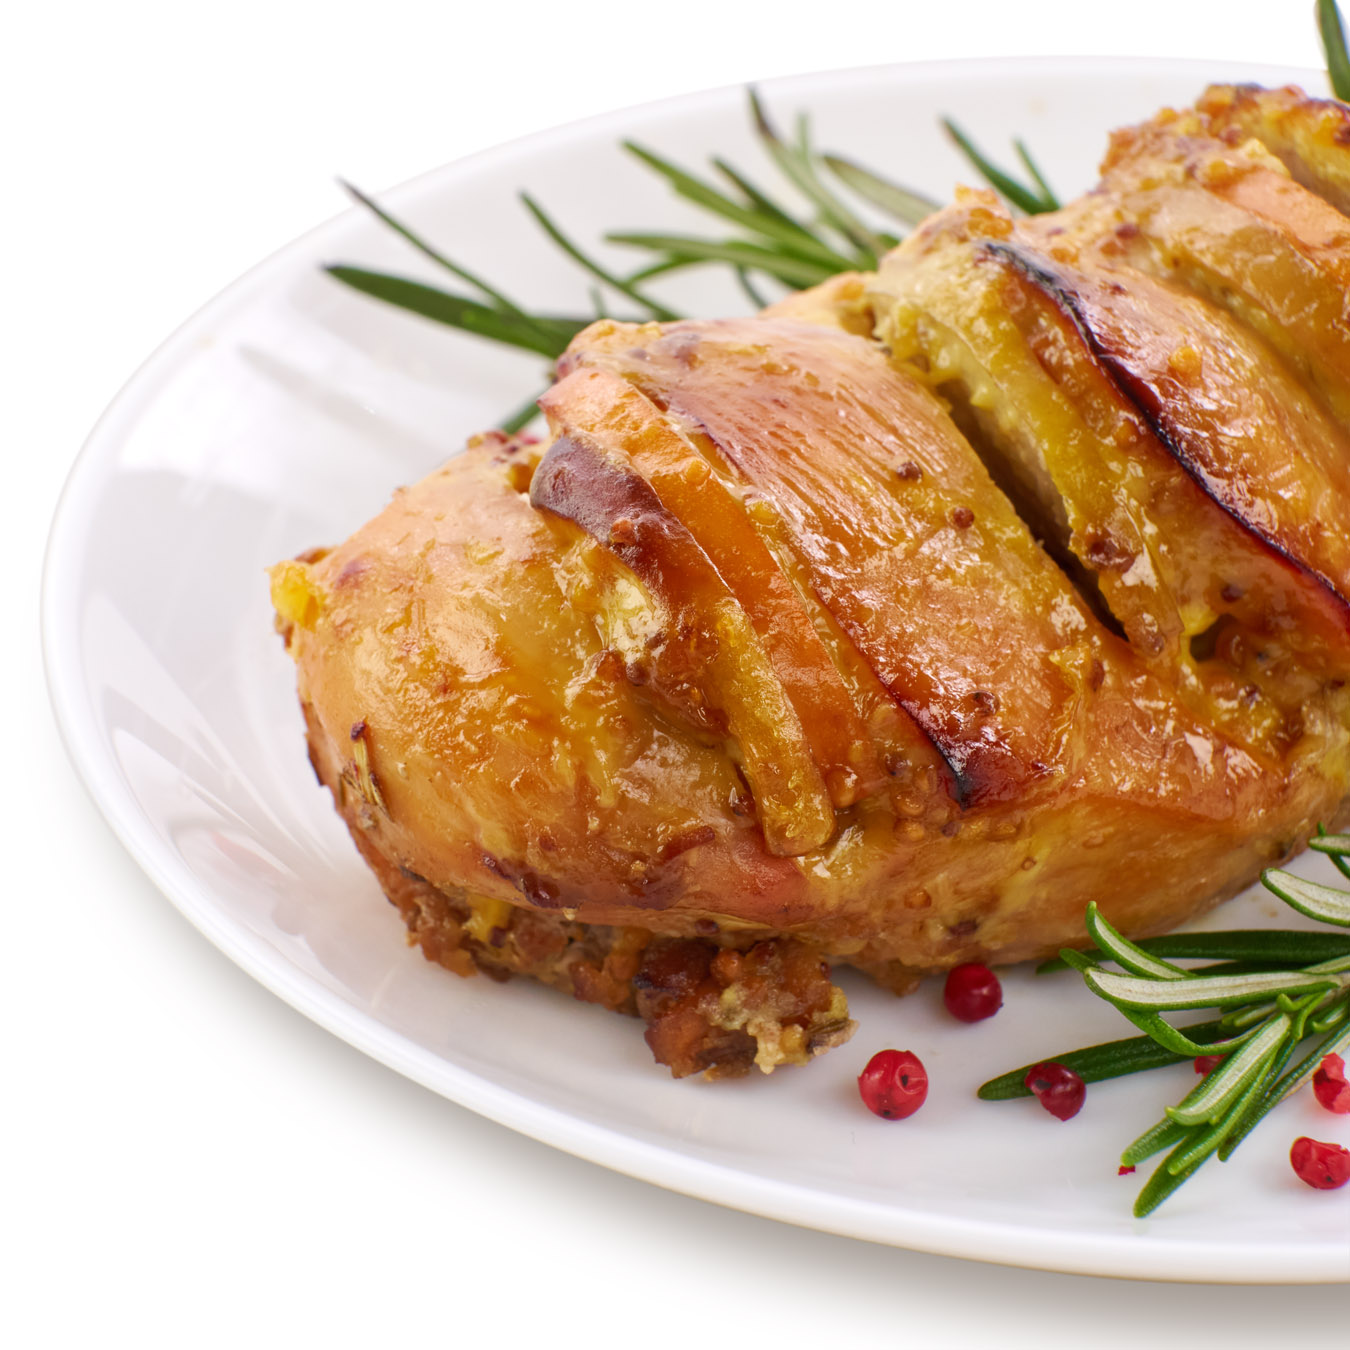 Baked chicken fillet with persimmon and apple